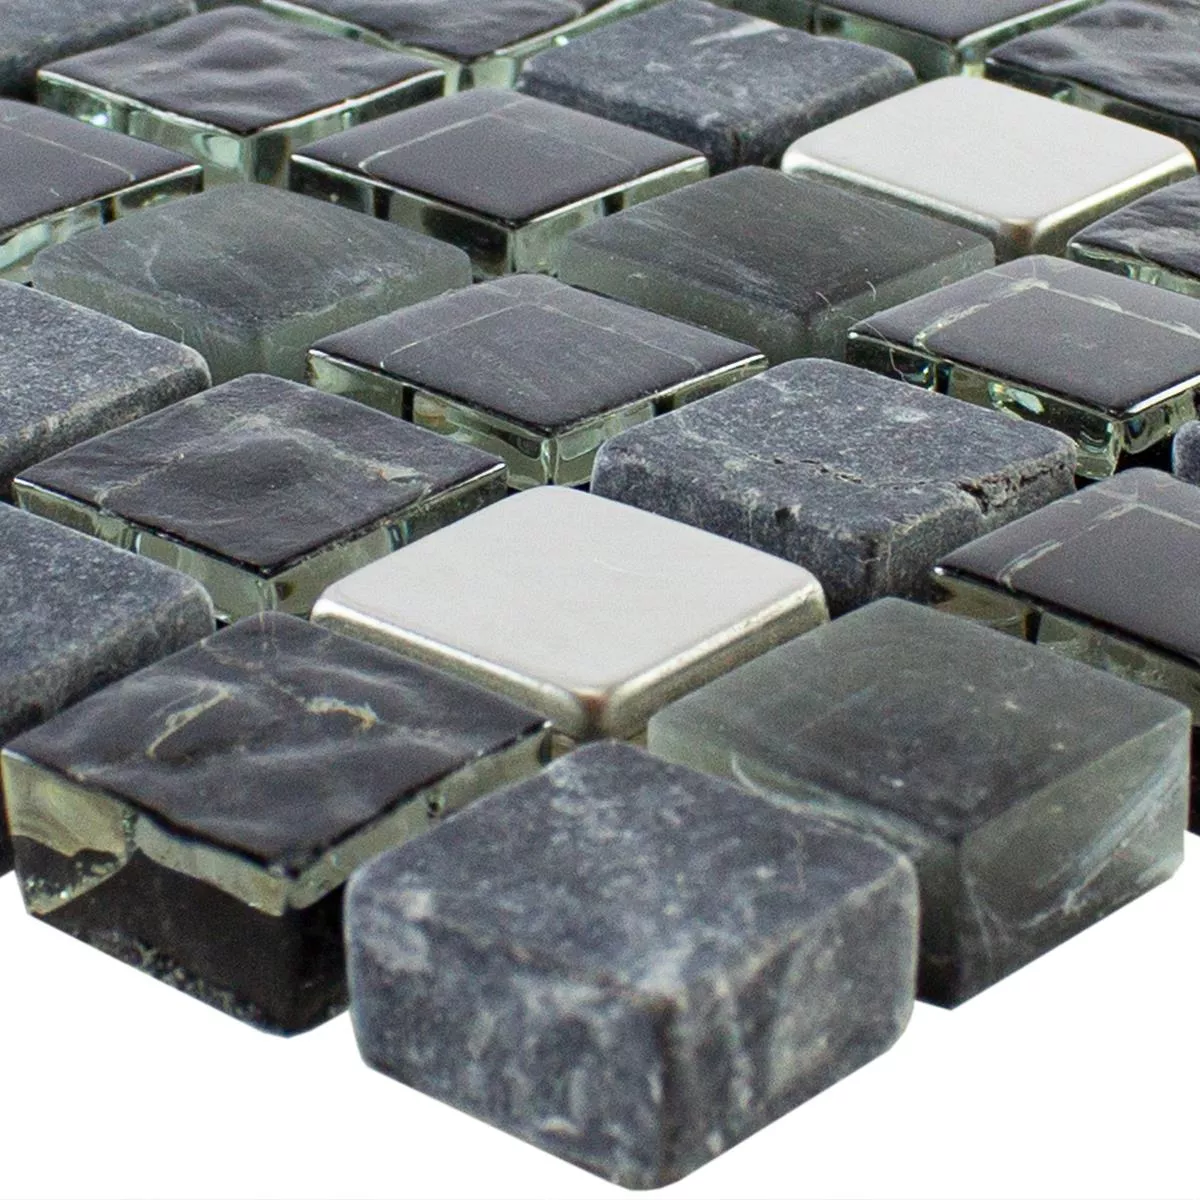 Sample Glass Natural Stone Stainless Steel Mosaic Kosovo Black Silver